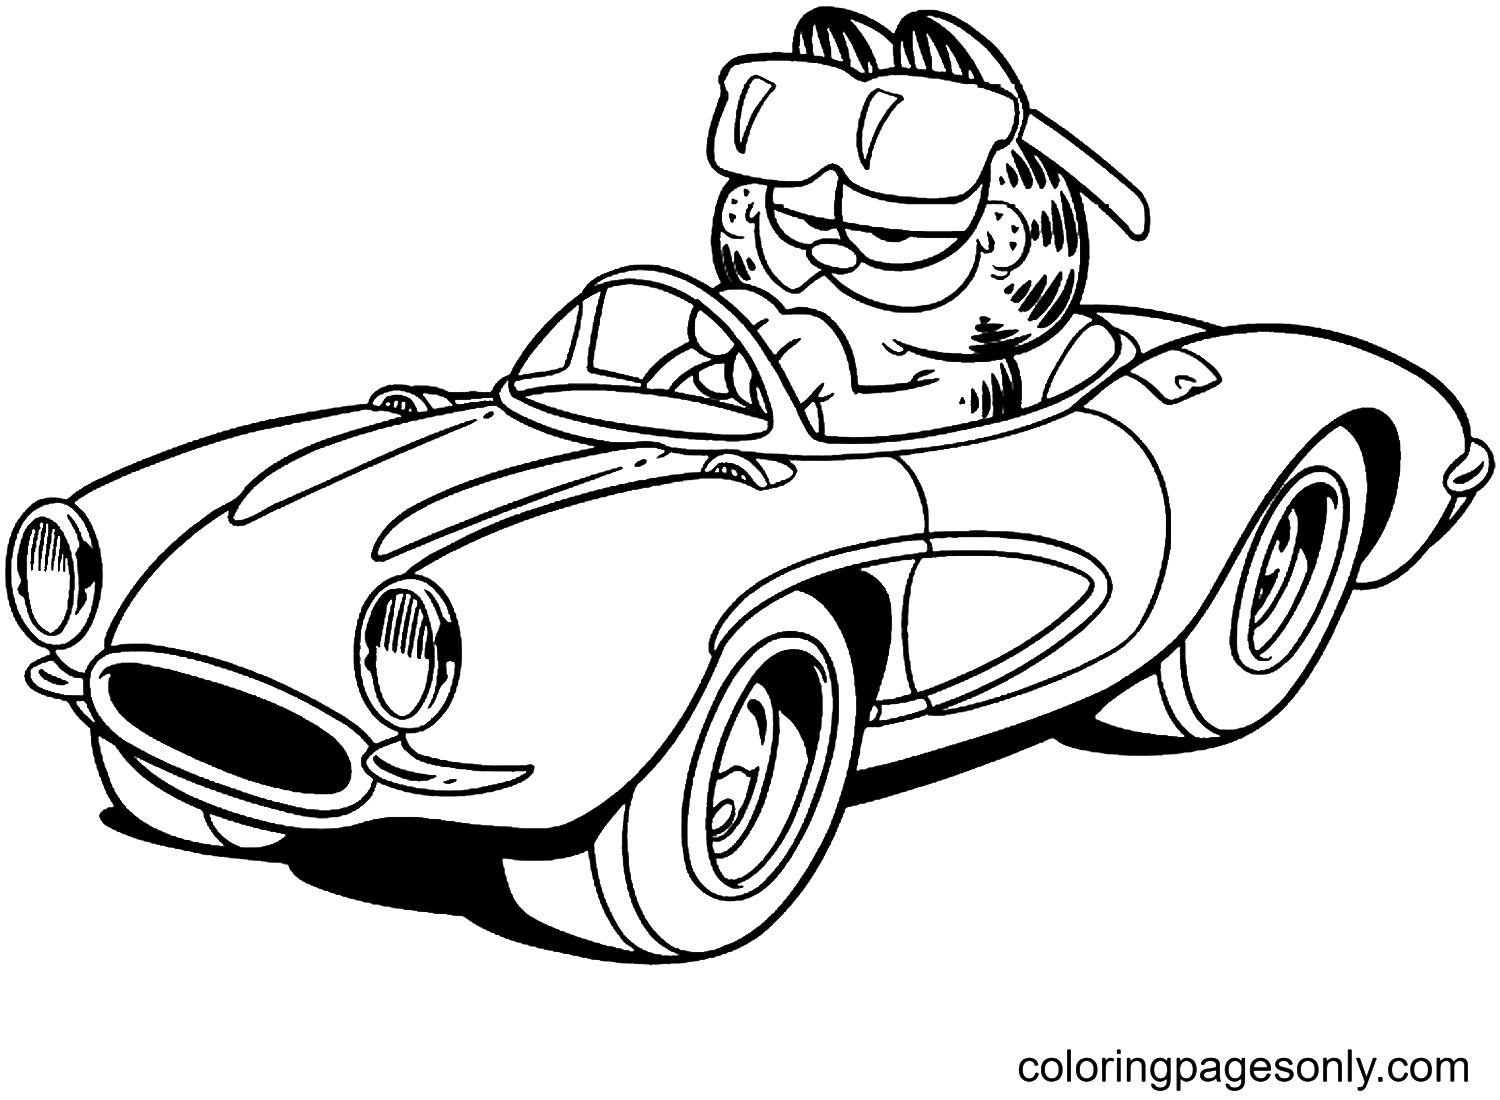 Garfield On The Car from Garfield